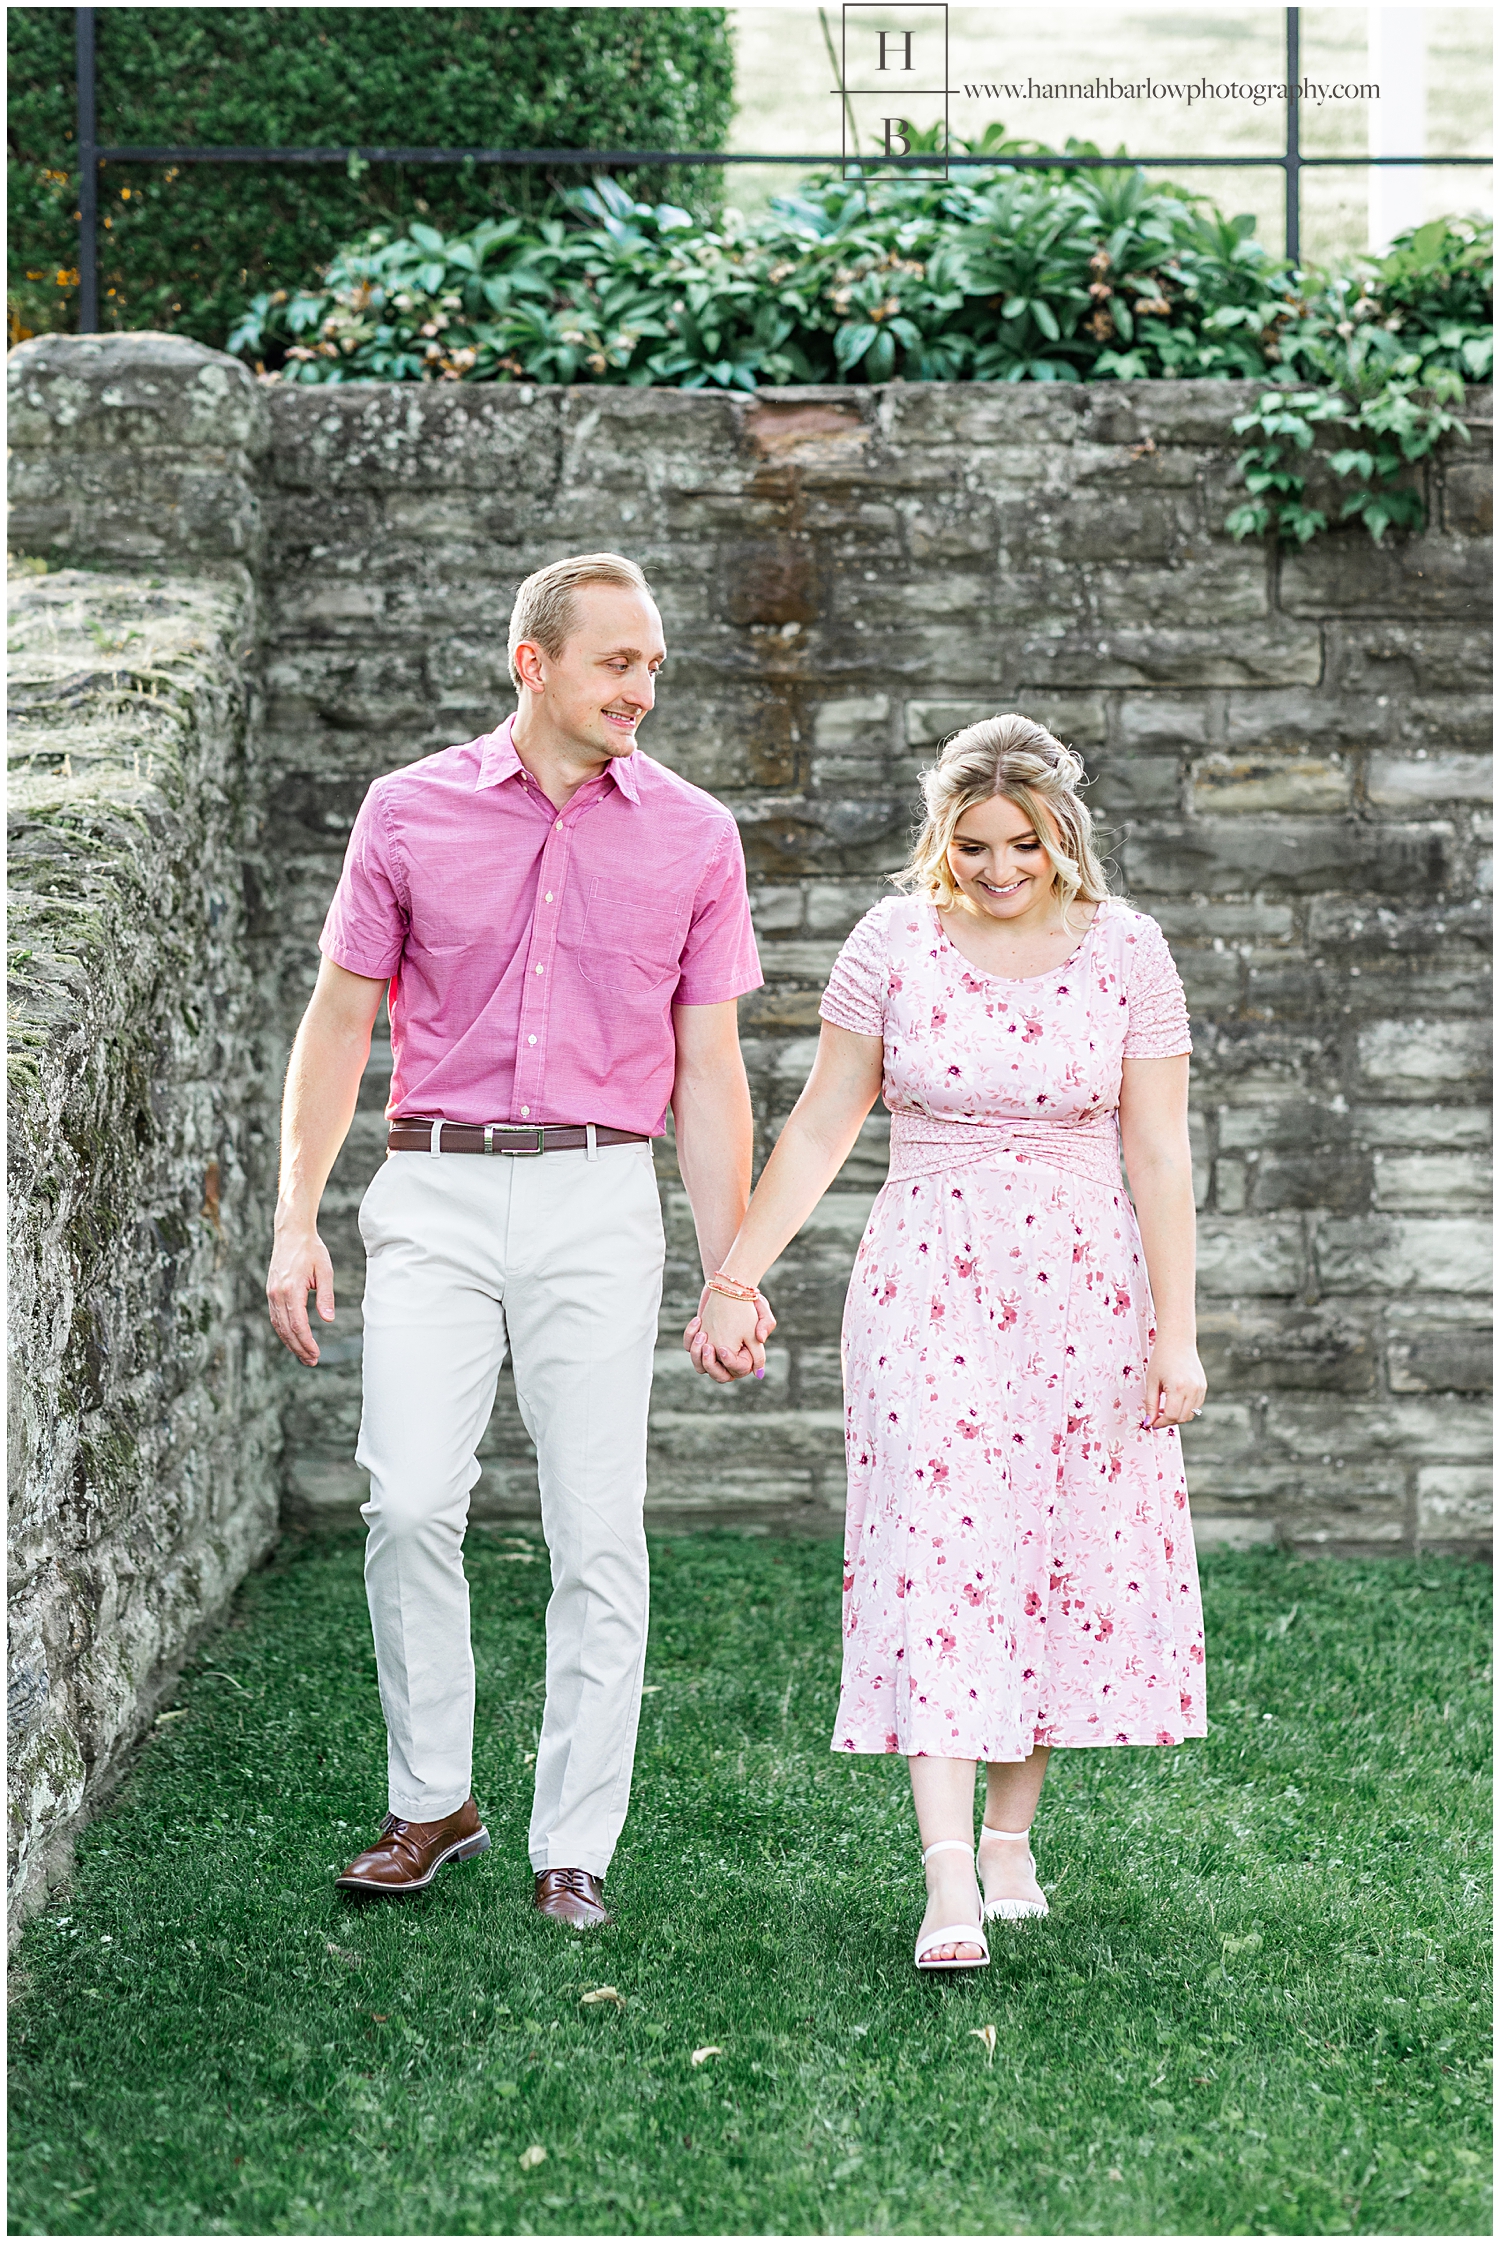 Lady in pink dress walks with fiancé holding hands for engagement photos.